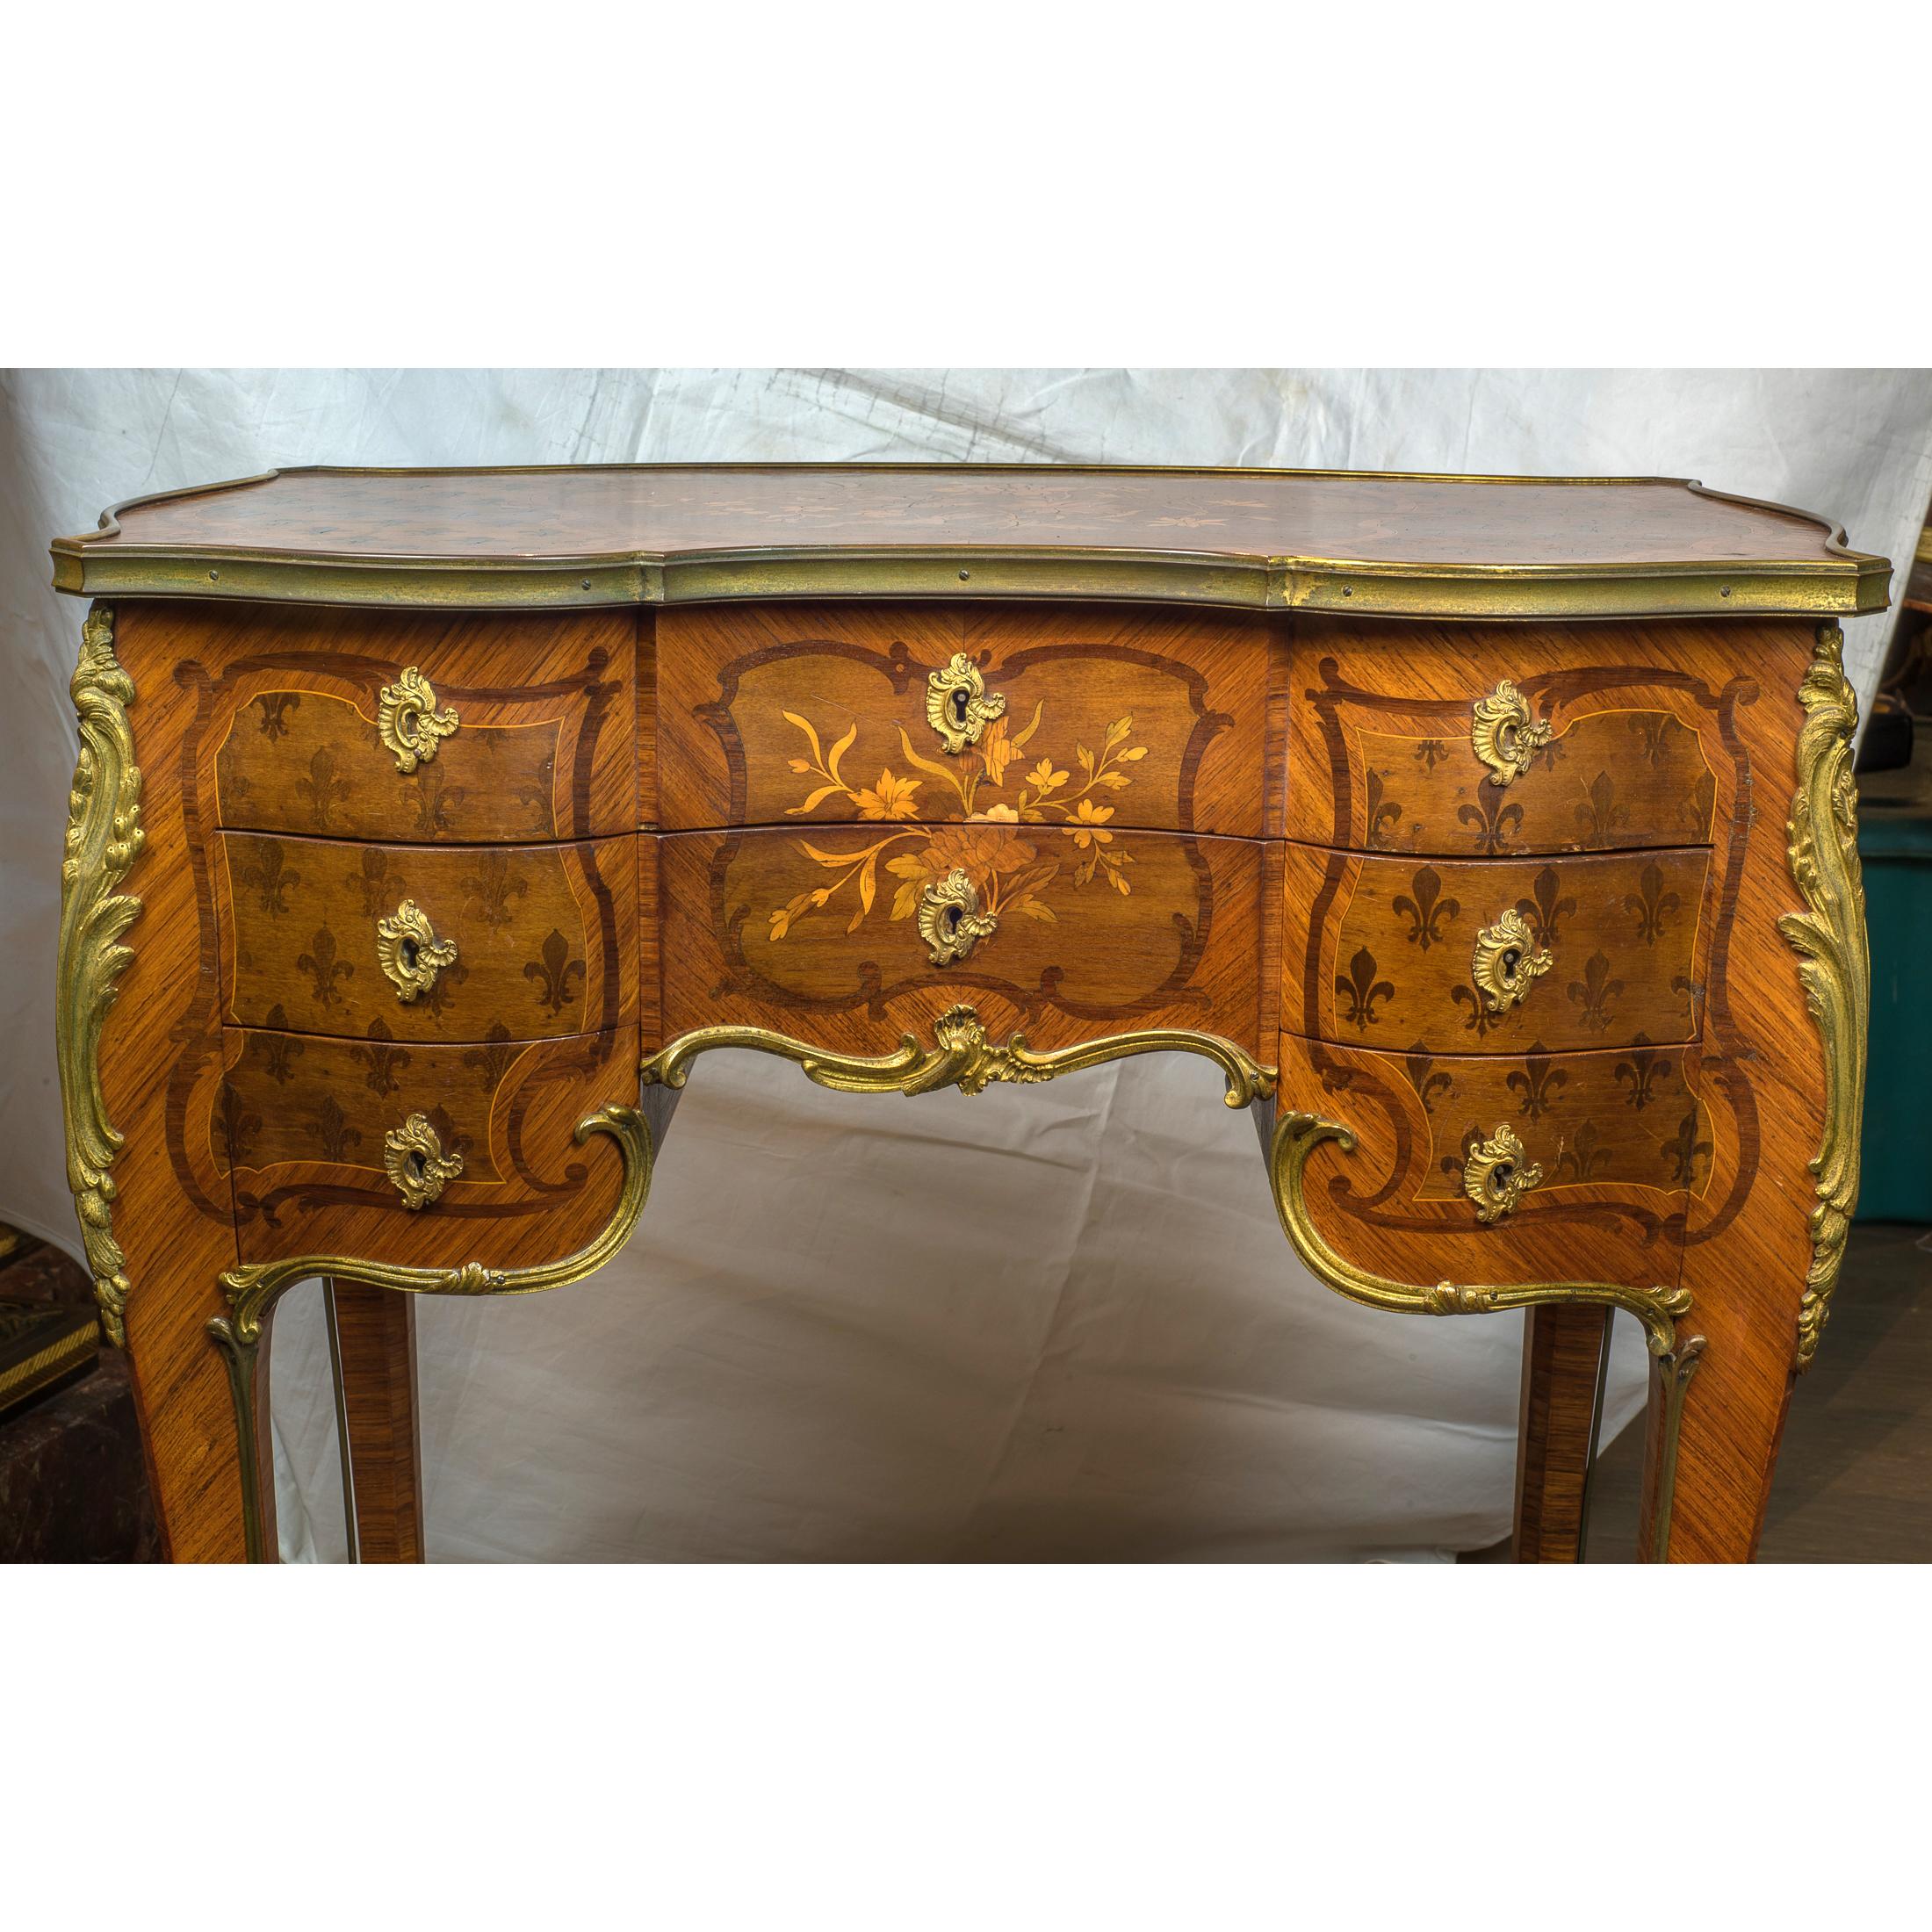 French Kingwood and Mahogany-Veneered Ormolu-Mounted Dressing Table For Sale 2